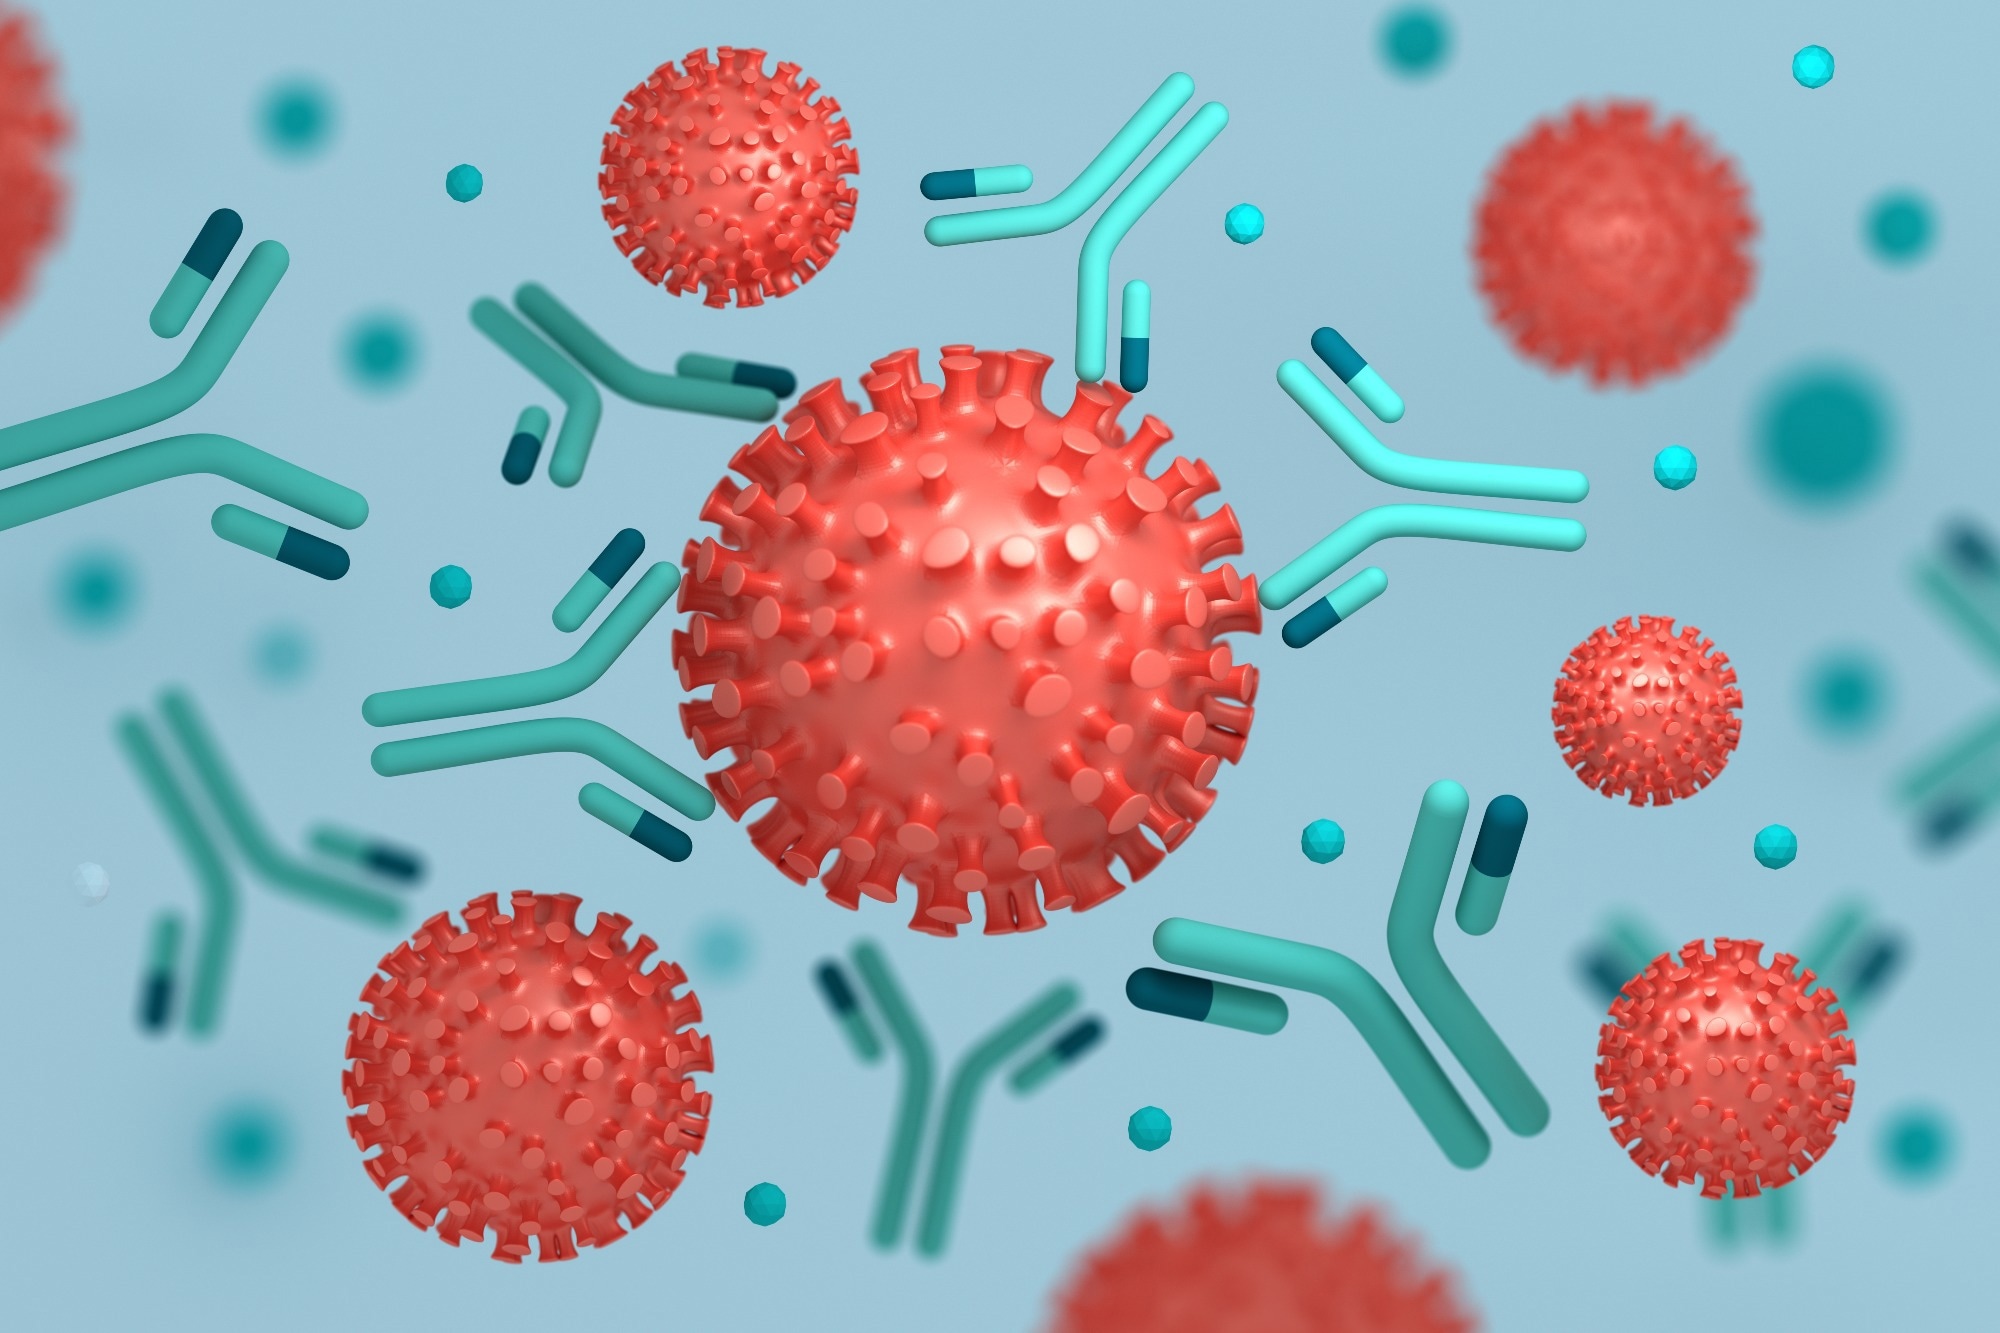 Study: PERSISTENT IMMUNITY AFTER MILD SARS CoV-2 INFECTION - THE CoNAN-LONG TERM STUDY. Image Credit: DariaRen / Shutterstock